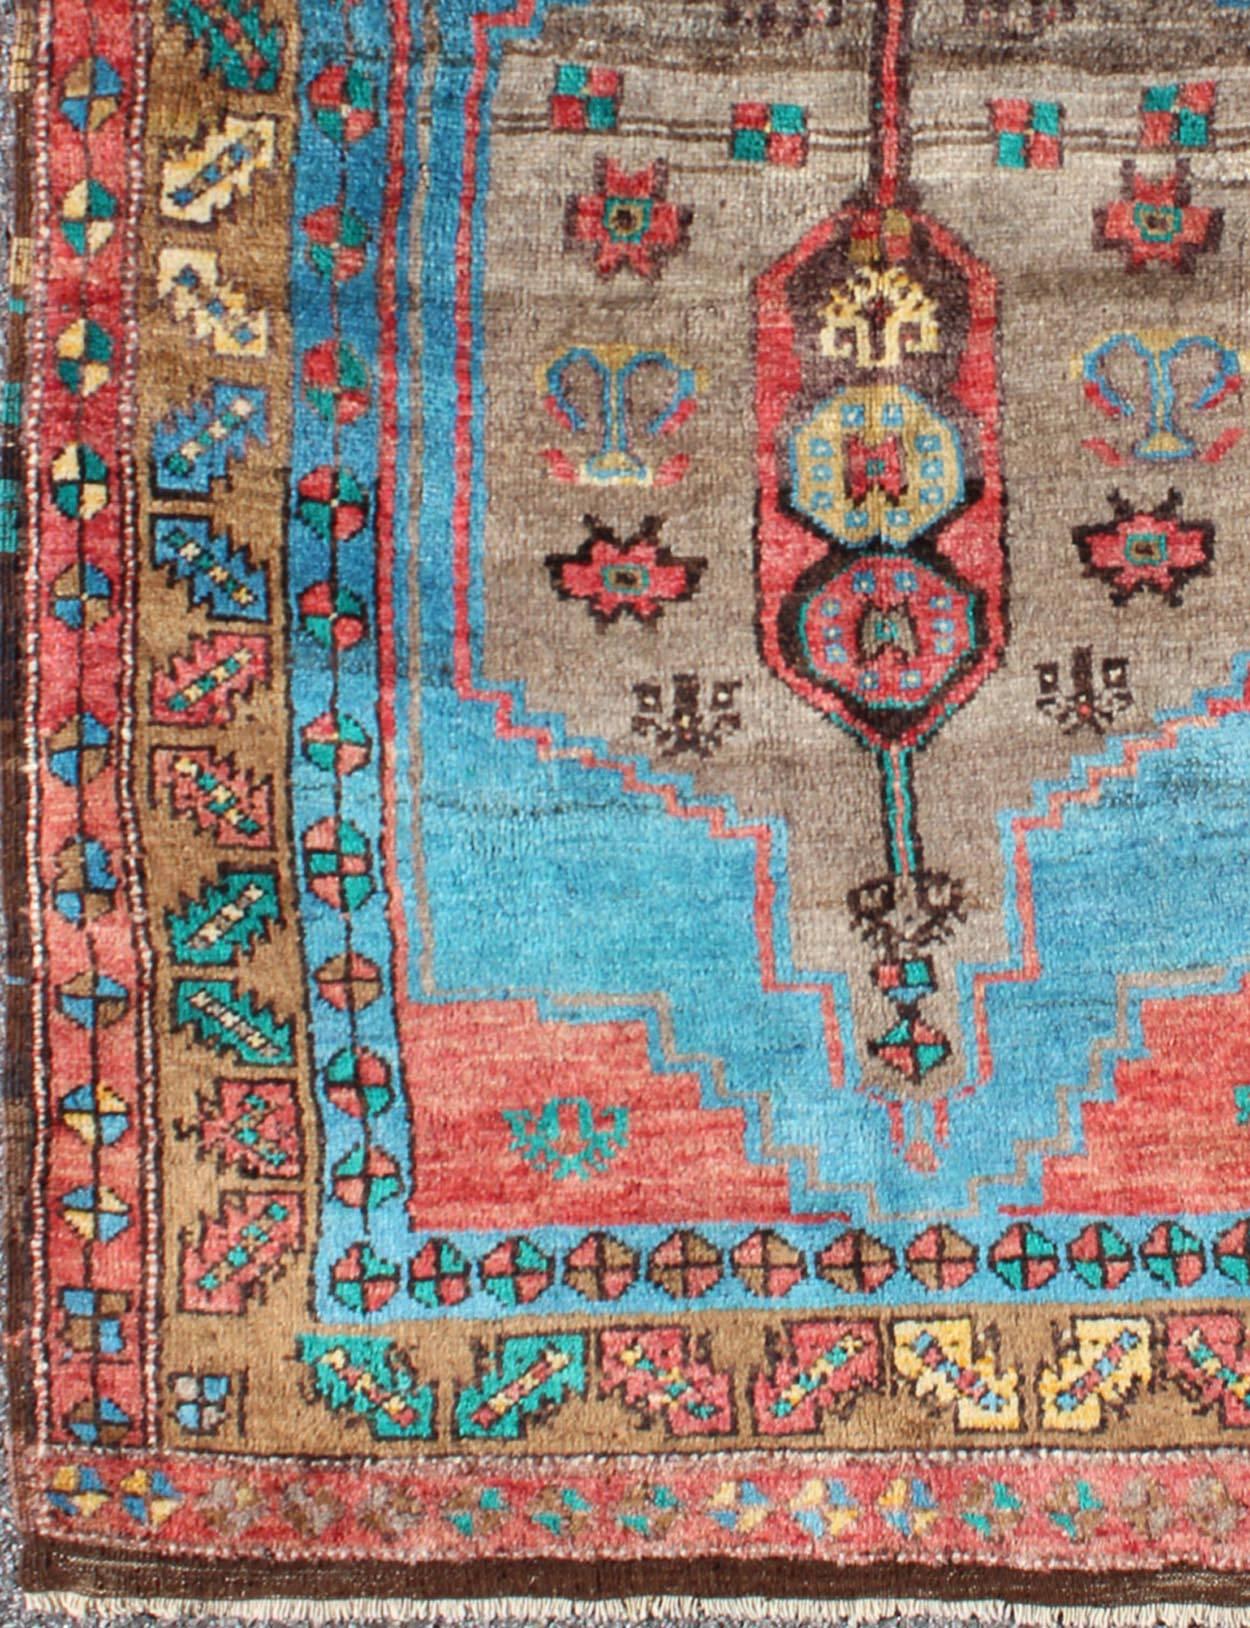 Colorful 1930's Antique Oushak Rug in Bright Colors with  geometric medallion. Keivan Woven Arts/ rug #EN-140207, Origin/Turkey, Antique Oushak. Small antique Oushak.

Measures: 3'8 x 5'4

This stunning small antique Oushak, from 1930's, Oushak,